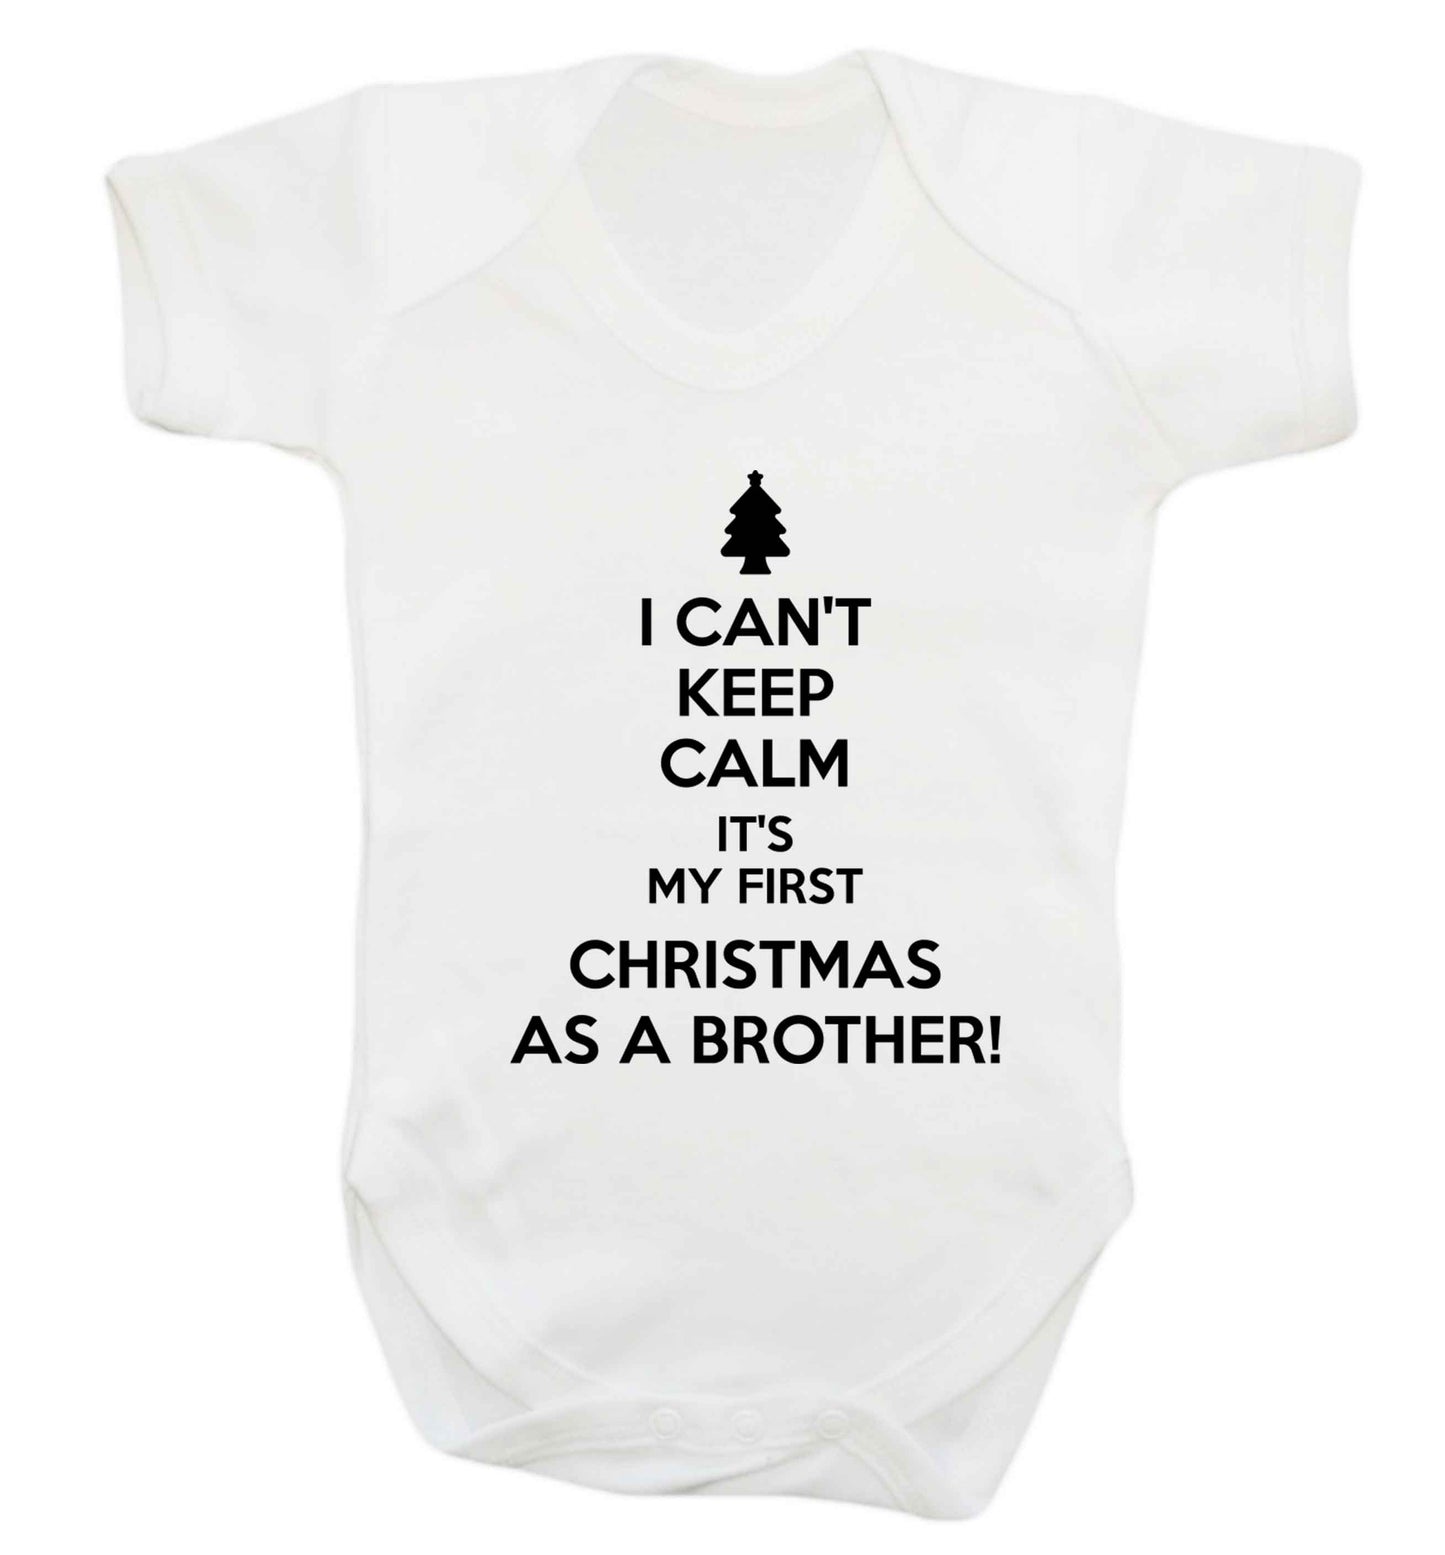 I can't keep calm it's my first Christmas as a brother! Baby Vest white 18-24 months